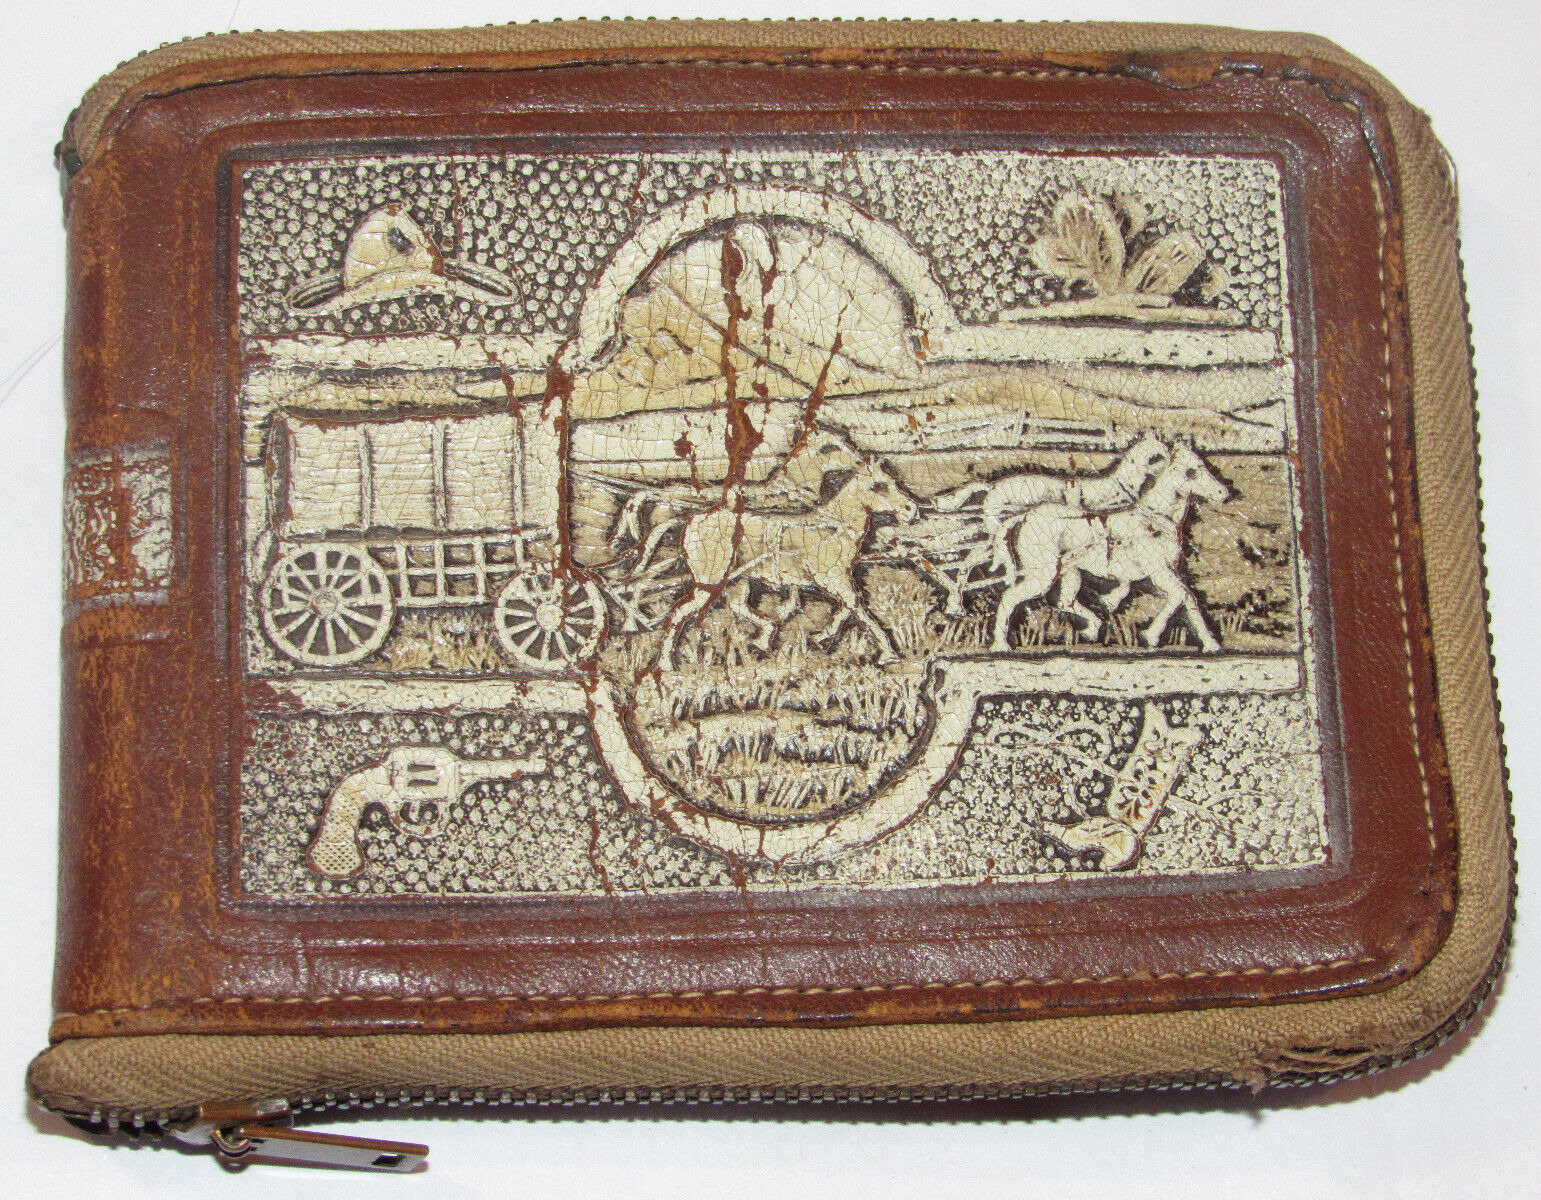 VINTAGE WESTERN DESIGN SHEEPSKIN LEATHER ZIPPERED WALLET STAGECOACH WITH HORSES